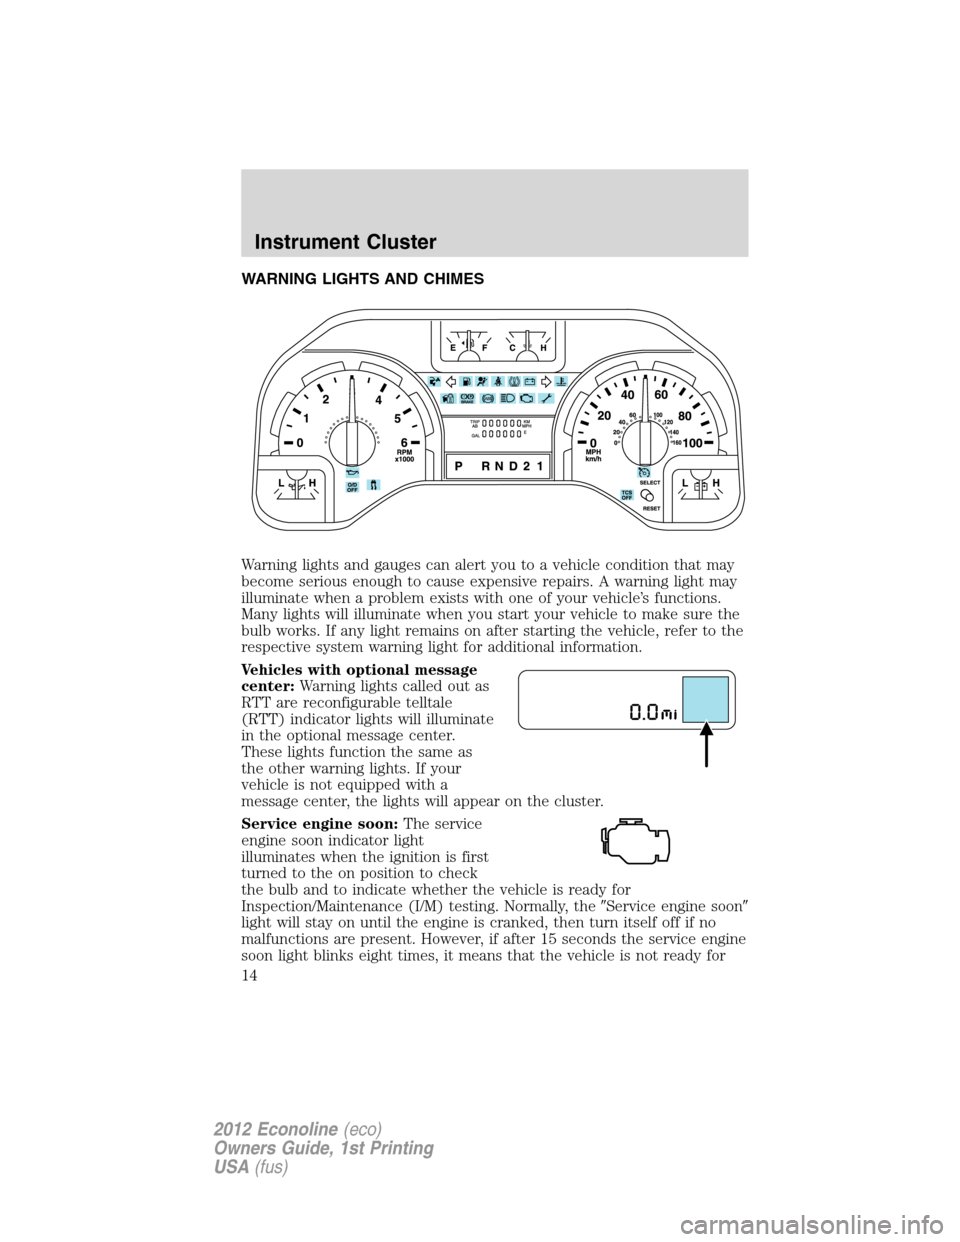 FORD E SERIES 2012 4.G User Guide WARNING LIGHTS AND CHIMES
Warning lights and gauges can alert you to a vehicle condition that may
become serious enough to cause expensive repairs. A warning light may
illuminate when a problem exists